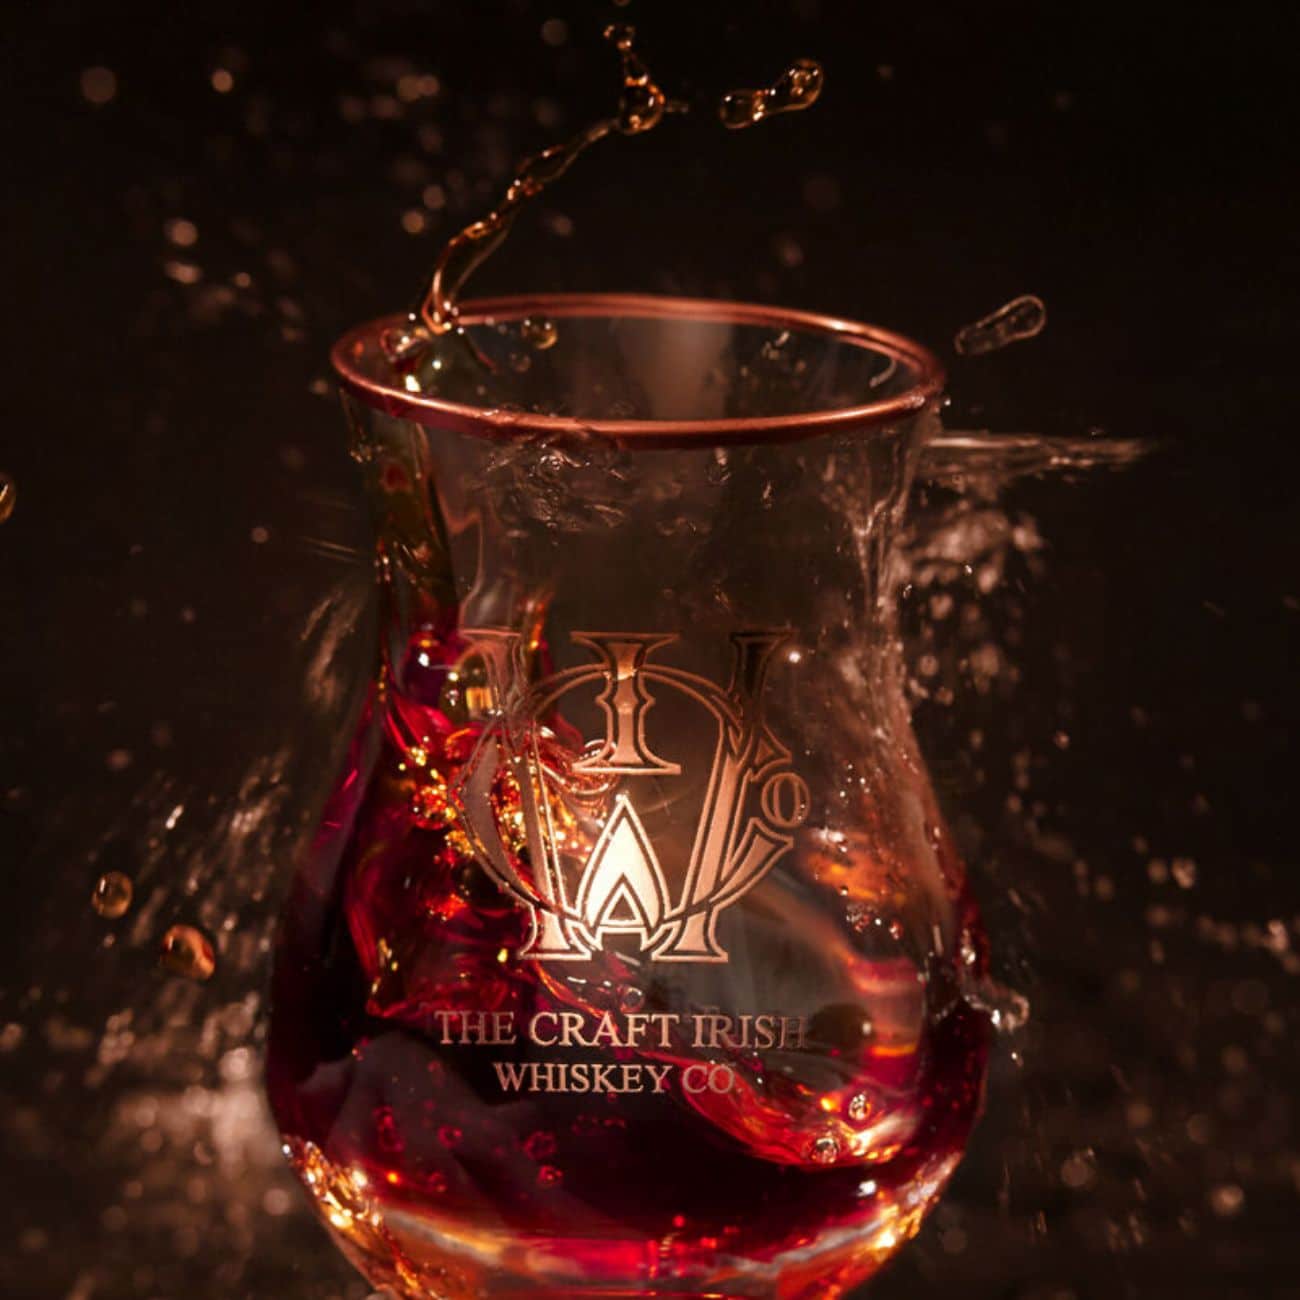 A whiskey glass by The Craft Irish Whiskey Co.